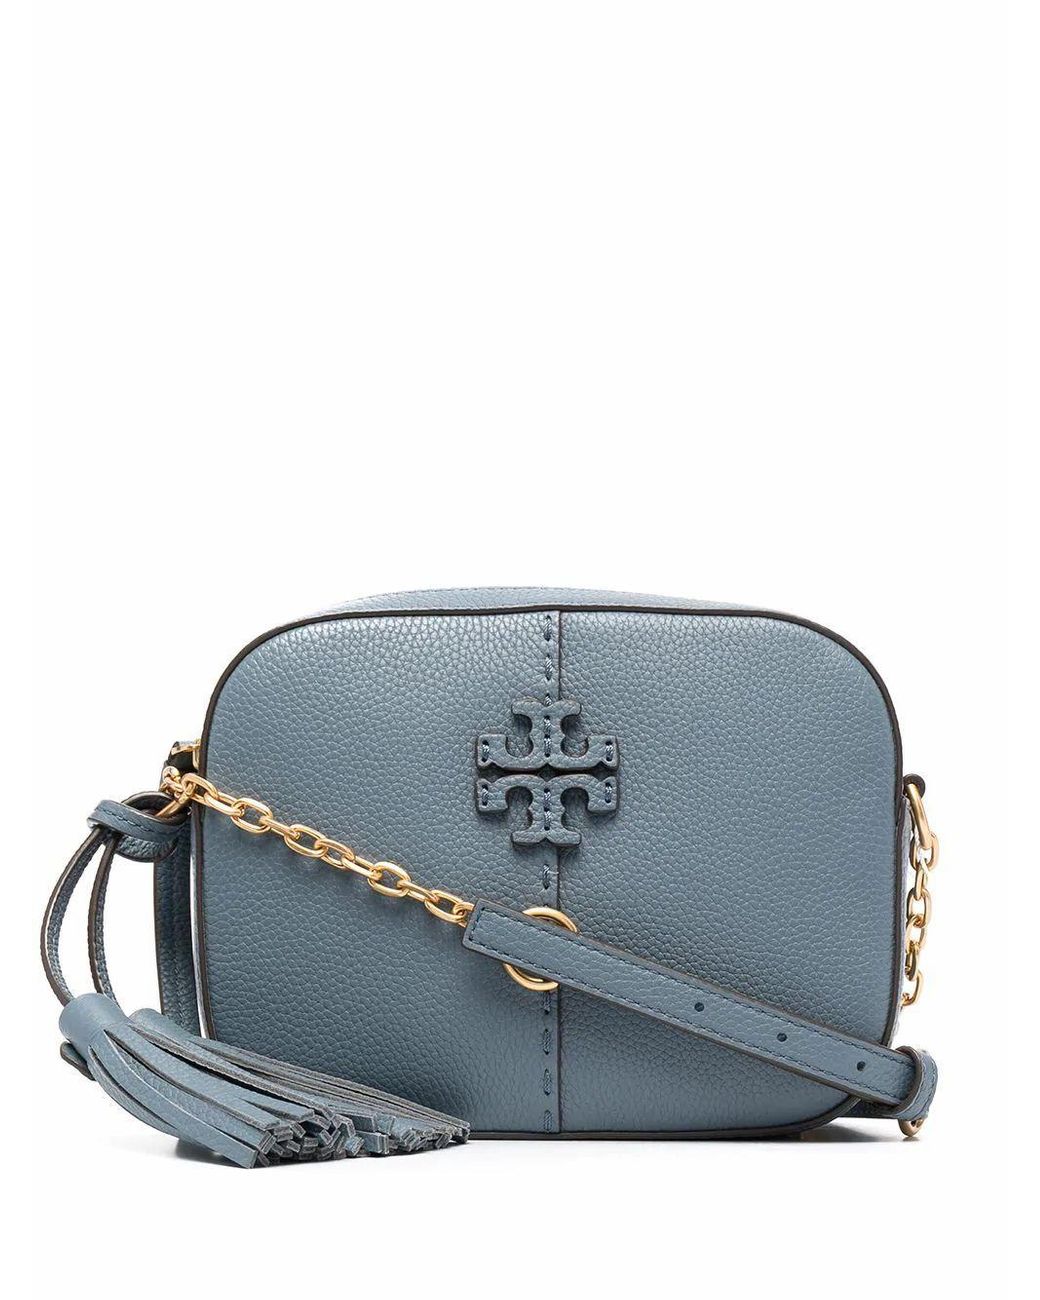 Tory Burch Leather Shoulder Bag in Blue - Lyst